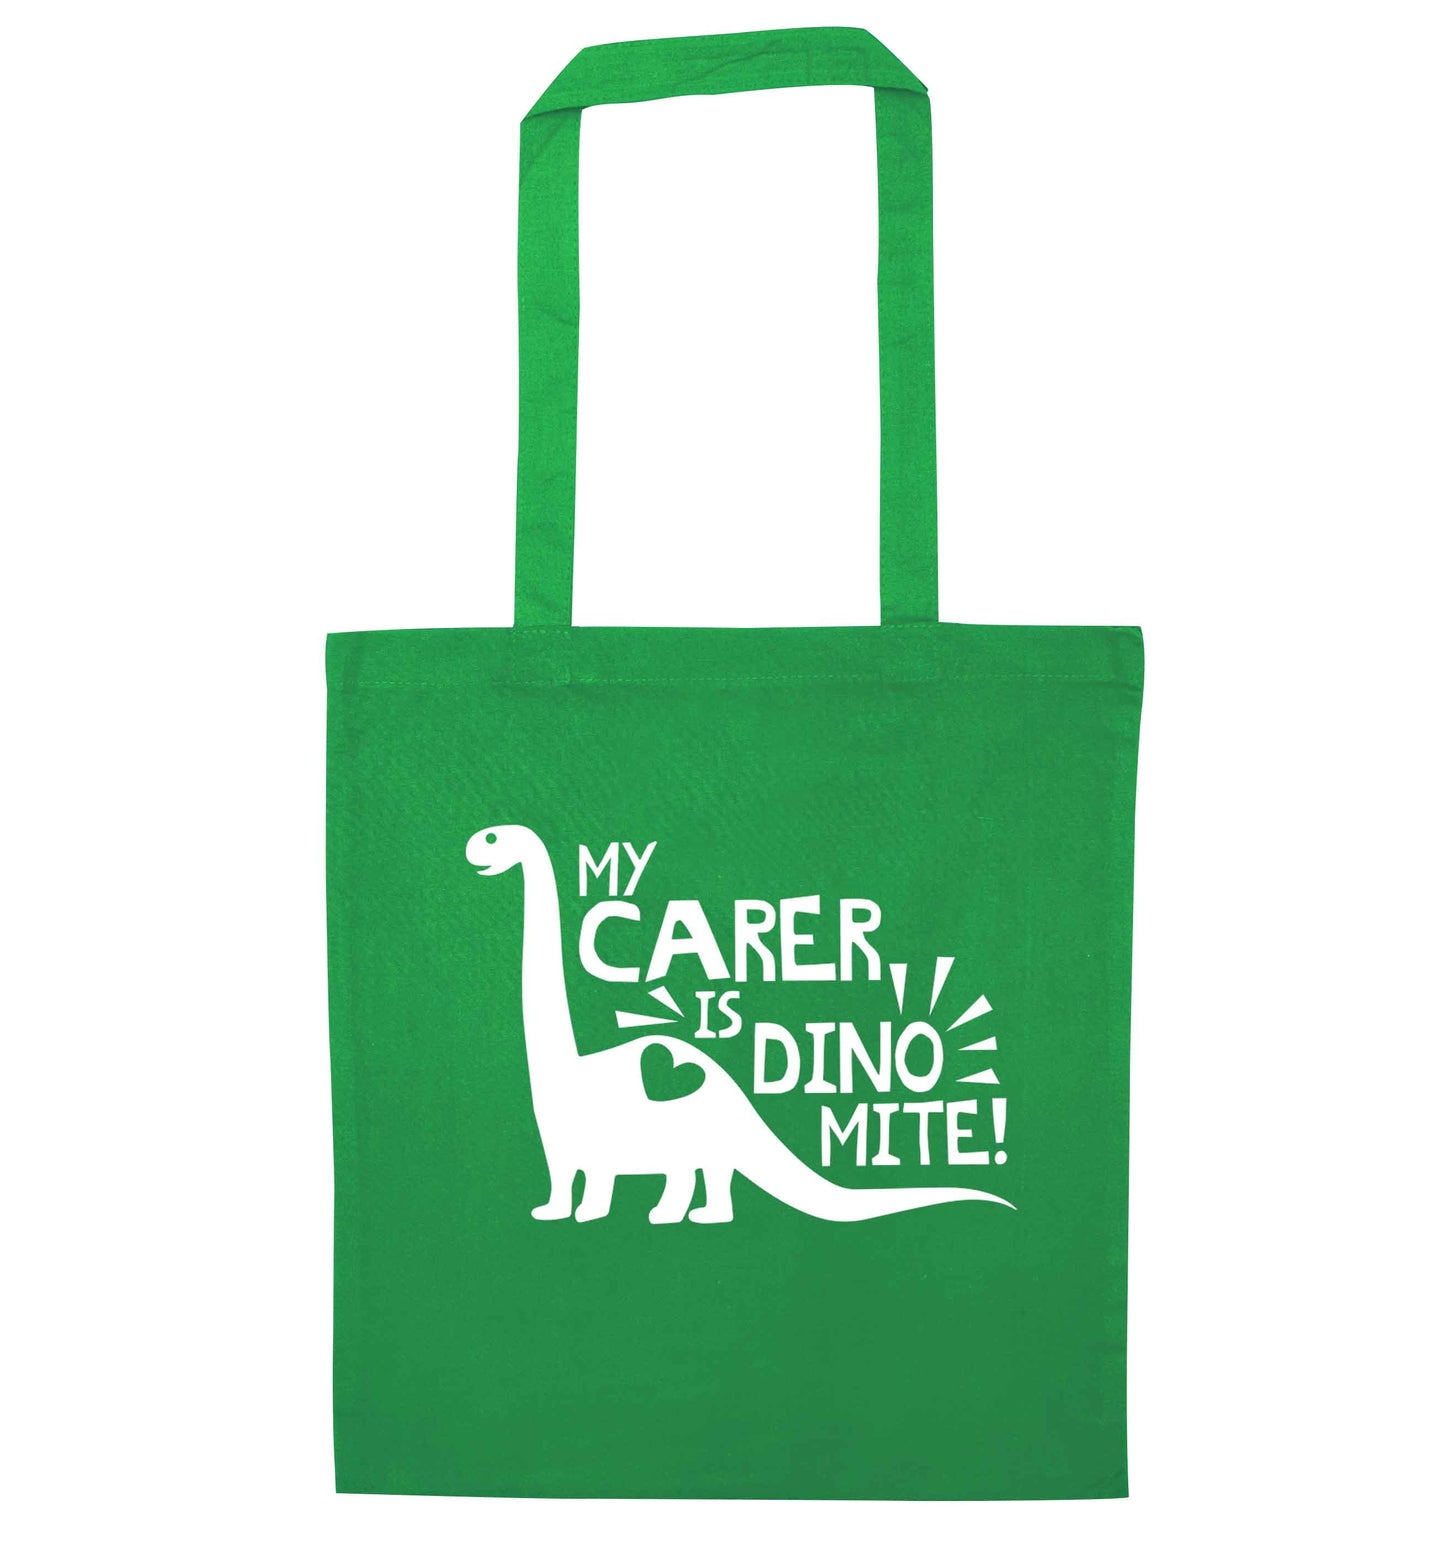 My carer is dinomite! green tote bag